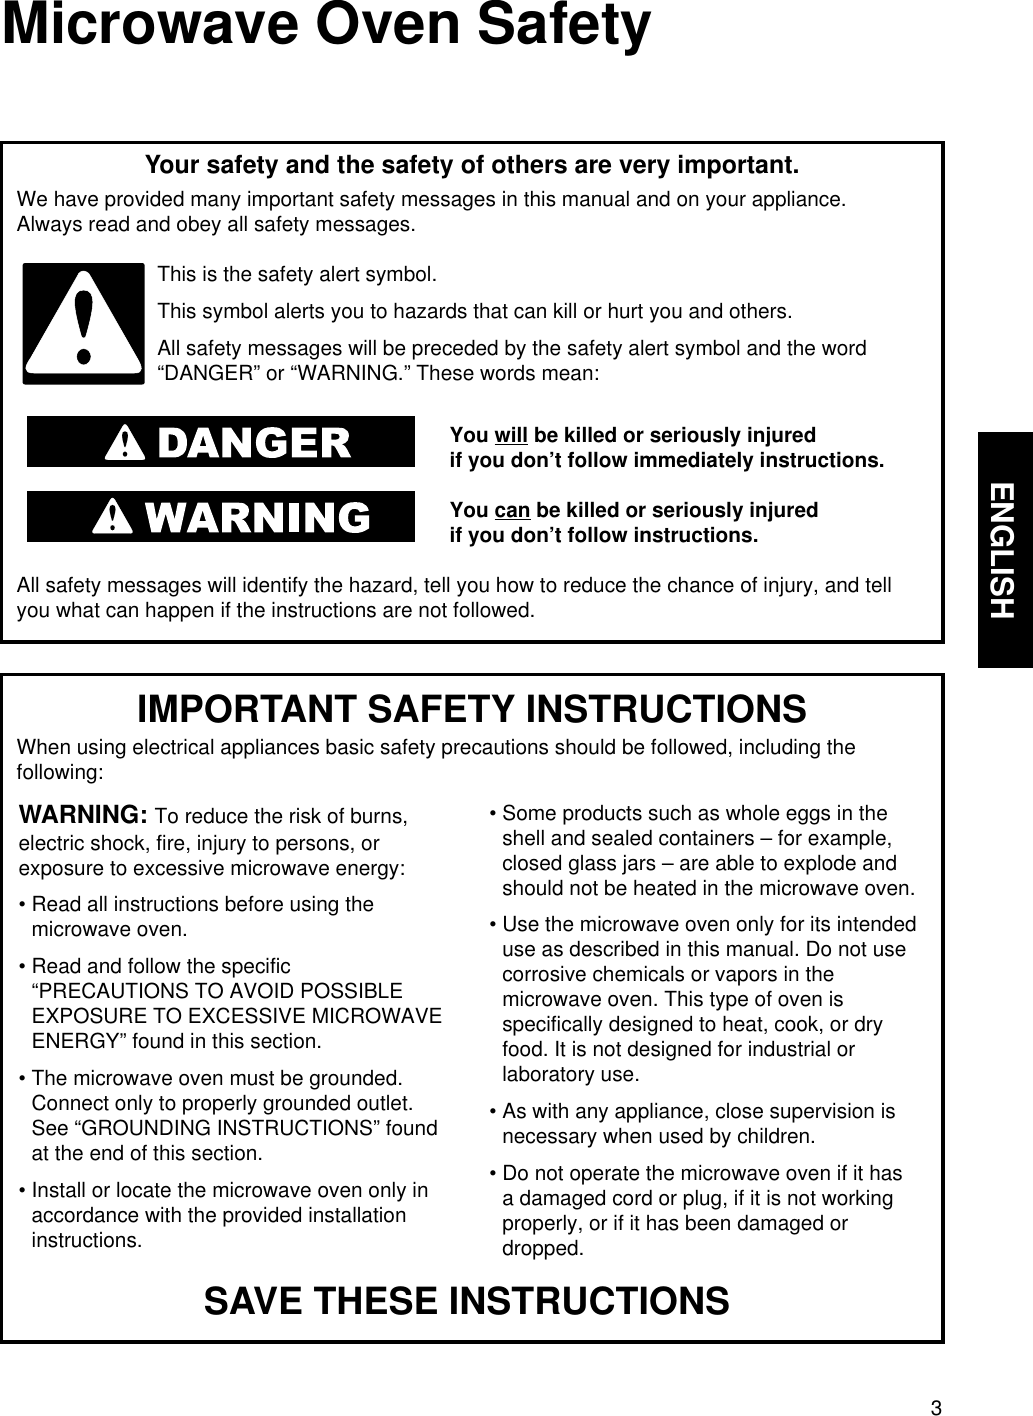 3ENGLISHMicrowave Oven SafetyYour safety and the safety of others are very important.We have provided many important safety messages in this manual and on your appliance. Always read and obey all safety messages.This is the safety alert symbol.This symbol alerts you to hazards that can kill or hurt you and others.All safety messages will be preceded by the safety alert symbol and the word“DANGER” or “WARNING.” These words mean:You will be killed or seriously injuredif you don’t follow immediately instructions.You can be killed or seriously injuredif you don’t follow instructions.All safety messages will identify the hazard, tell you how to reduce the chance of injury, and tellyou what can happen if the instructions are not followed.IMPORTANT SAFETY INSTRUCTIONSWhen using electrical appliances basic safety precautions should be followed, including thefollowing:WARNING: To reduce the risk of burns,electric shock, fire, injury to persons, orexposure to excessive microwave energy:• Read all instructions before using themicrowave oven.• Read and follow the specific“PRECAUTIONS TO AVOID POSSIBLEEXPOSURE TO EXCESSIVE MICROWAVEENERGY” found in this section.• The microwave oven must be grounded.Connect only to properly grounded outlet.See “GROUNDING INSTRUCTIONS” foundat the end of this section.• Install or locate the microwave oven only inaccordance with the provided installationinstructions.• Some products such as whole eggs in theshell and sealed containers – for example,closed glass jars – are able to explode andshould not be heated in the microwave oven.• Use the microwave oven only for its intendeduse as described in this manual. Do not usecorrosive chemicals or vapors in themicrowave oven. This type of oven isspecifically designed to heat, cook, or dryfood. It is not designed for industrial orlaboratory use.• As with any appliance, close supervision isnecessary when used by children.• Do not operate the microwave oven if it hasa damaged cord or plug, if it is not workingproperly, or if it has been damaged ordropped.SAVE THESE INSTRUCTIONS